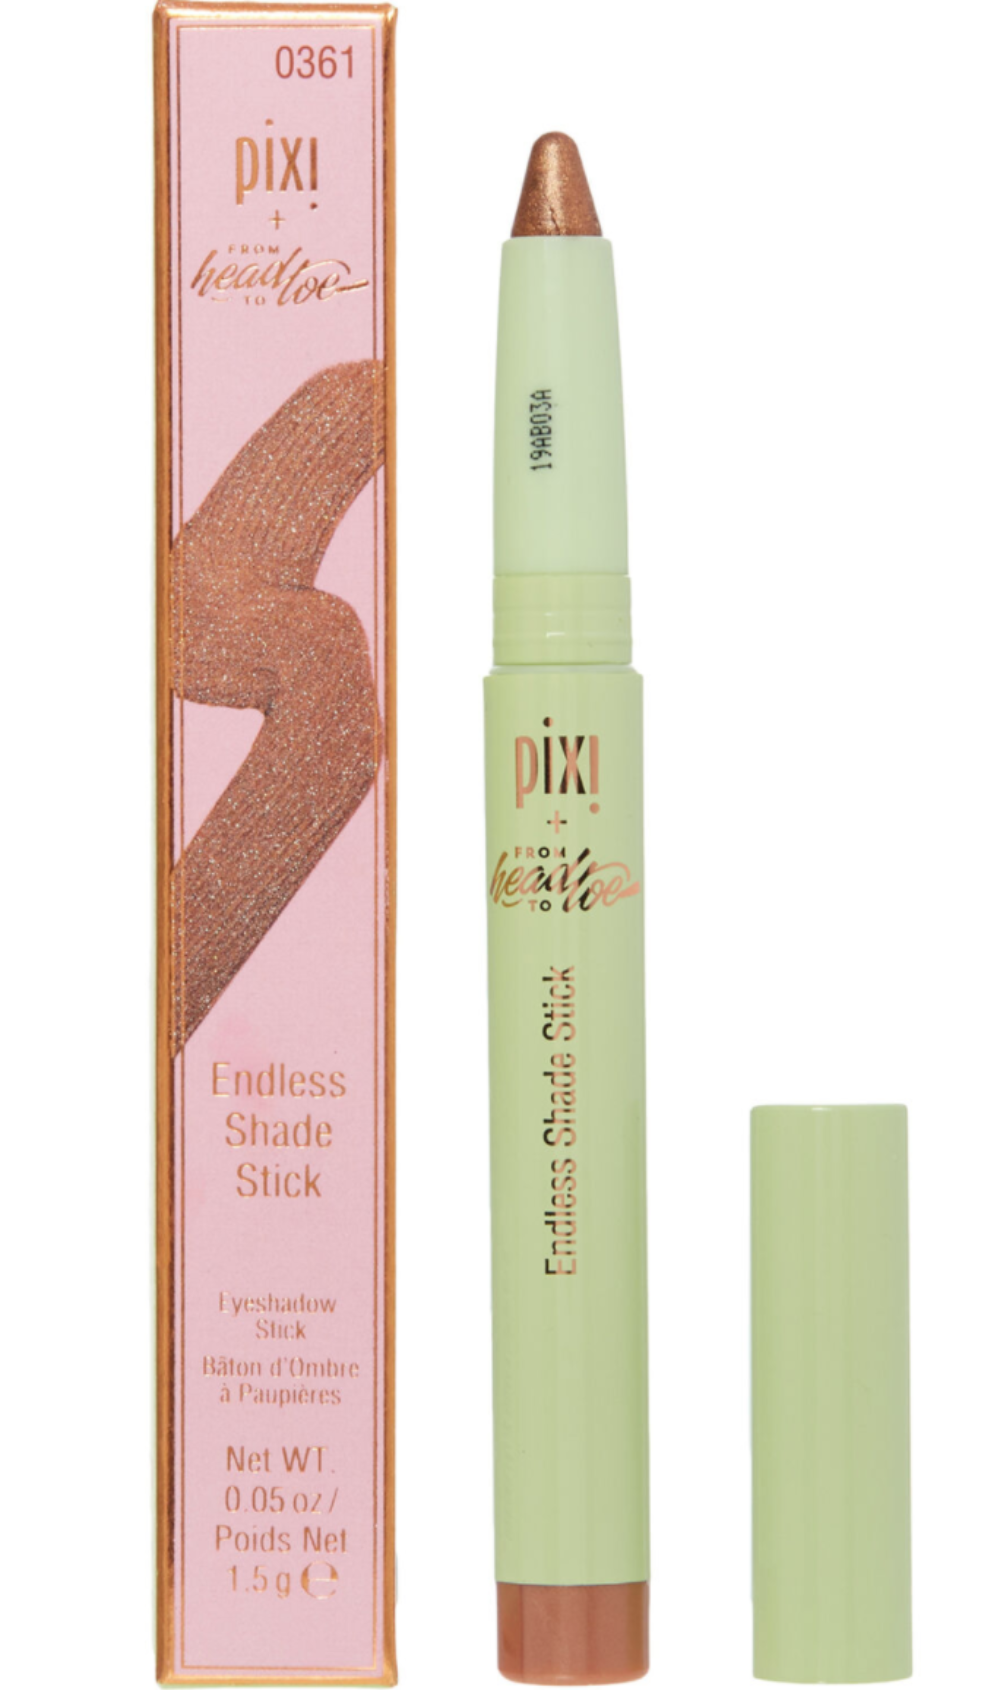 PIXI From Head to Toe Endless Shade Stick 1.5g - One & Done - The Face Method